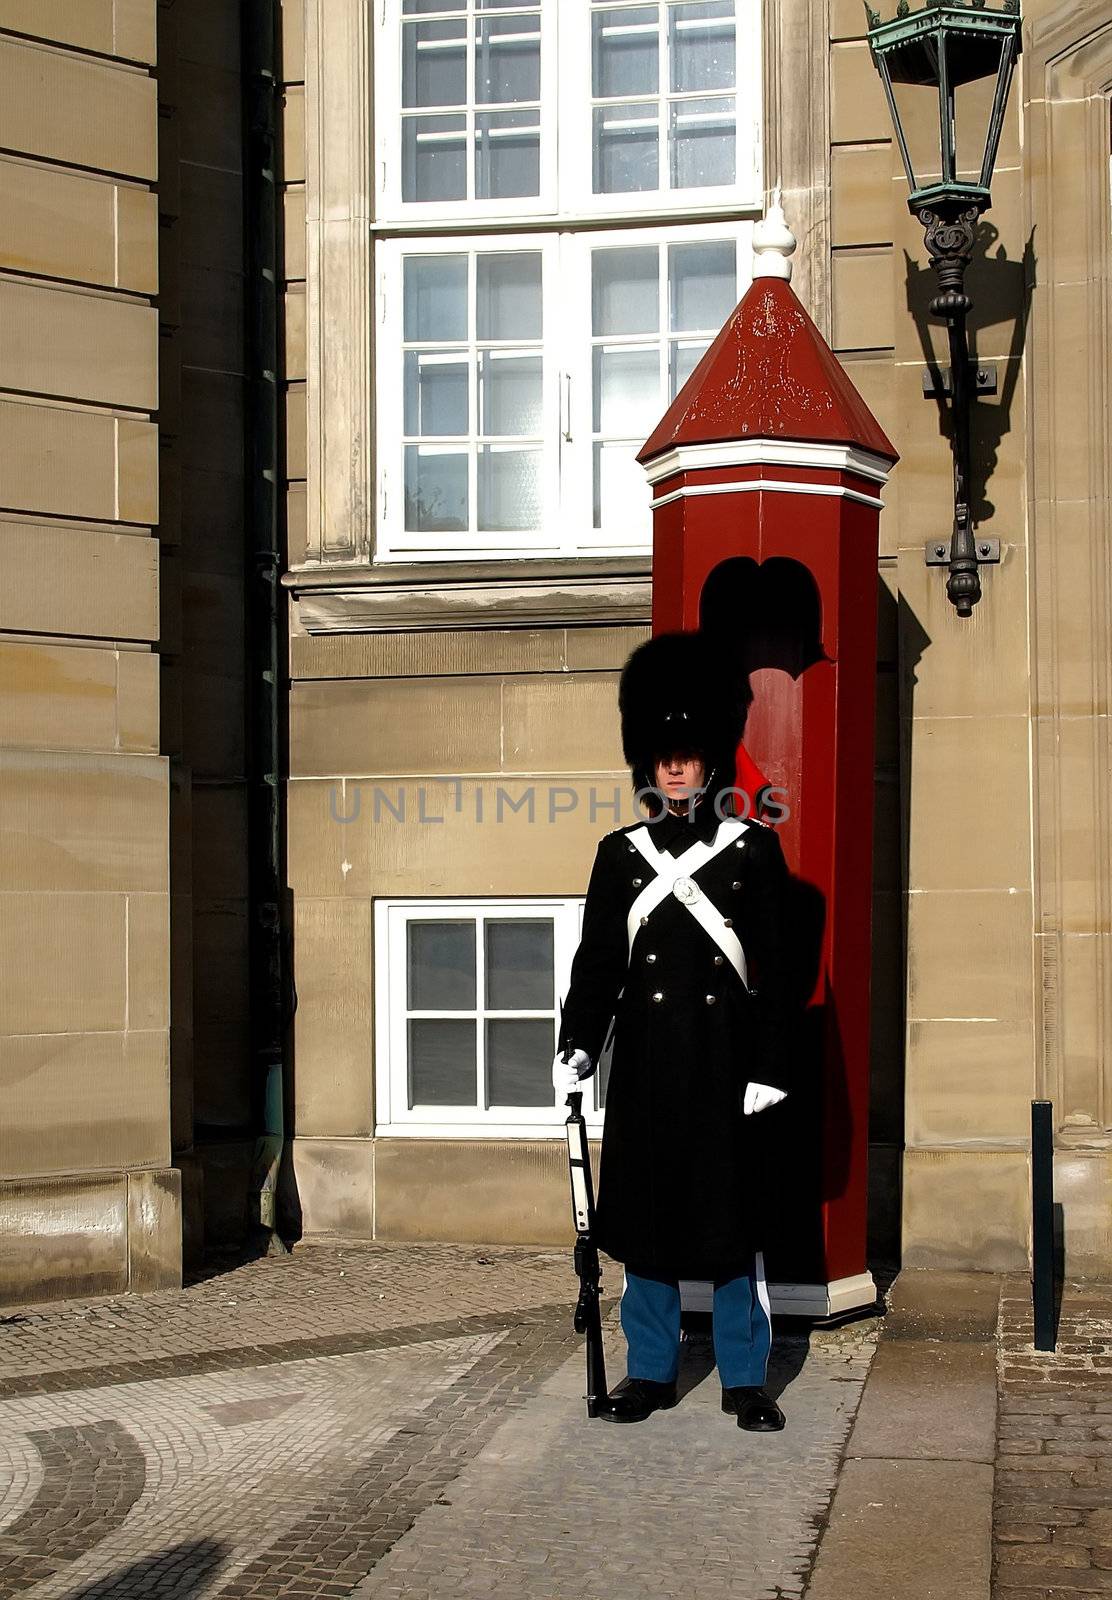 Unknown Danish Royal Life Guard posted at Amalienborg Palace in Copenhagen, Denmark.